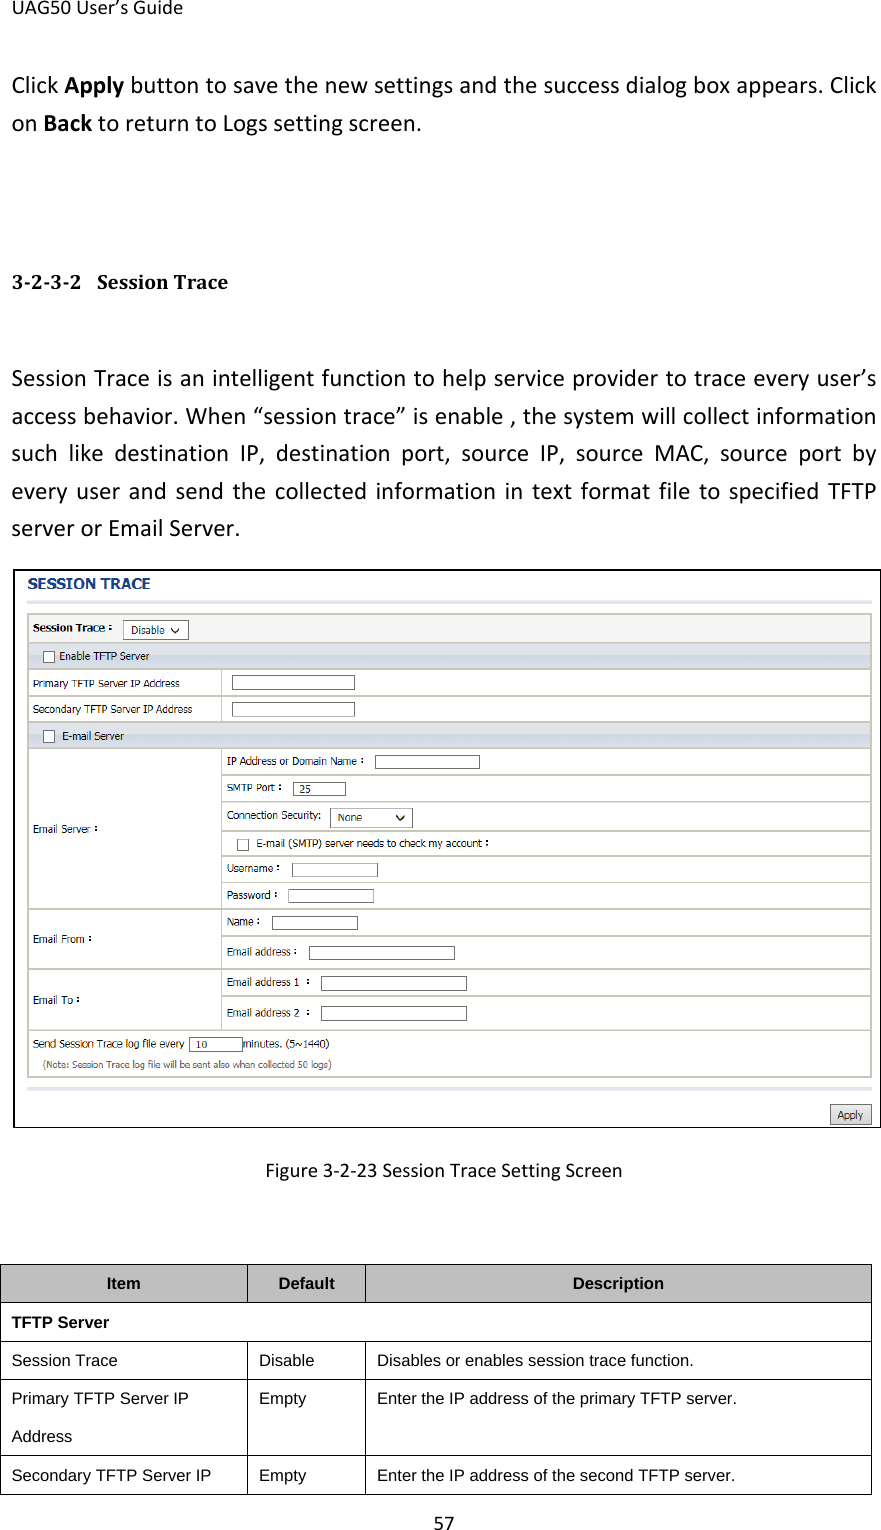 UAG50 User’s Guide 57 Click Apply button to save the new settings and the success dialog box appears. Click on Back to return to Logs setting screen.  3-2-3-2  Session Trace Session Trace is an intelligent function to help service provider to trace every user’s access behavior. When “session trace” is enable , the system will collect information such like destination IP, destination port, source IP, source MAC, source port by every user and send the collected information in text format file to specified TFTP server or Email Server.  Figure 3-2-23 Session Trace Setting Screen  Item Default Description TFTP Server Session Trace Disable Disables or enables session trace function. Primary TFTP Server IP Address Empty Enter the IP address of the primary TFTP server. Secondary TFTP Server IP  Empty Enter the IP address of the second TFTP server. 